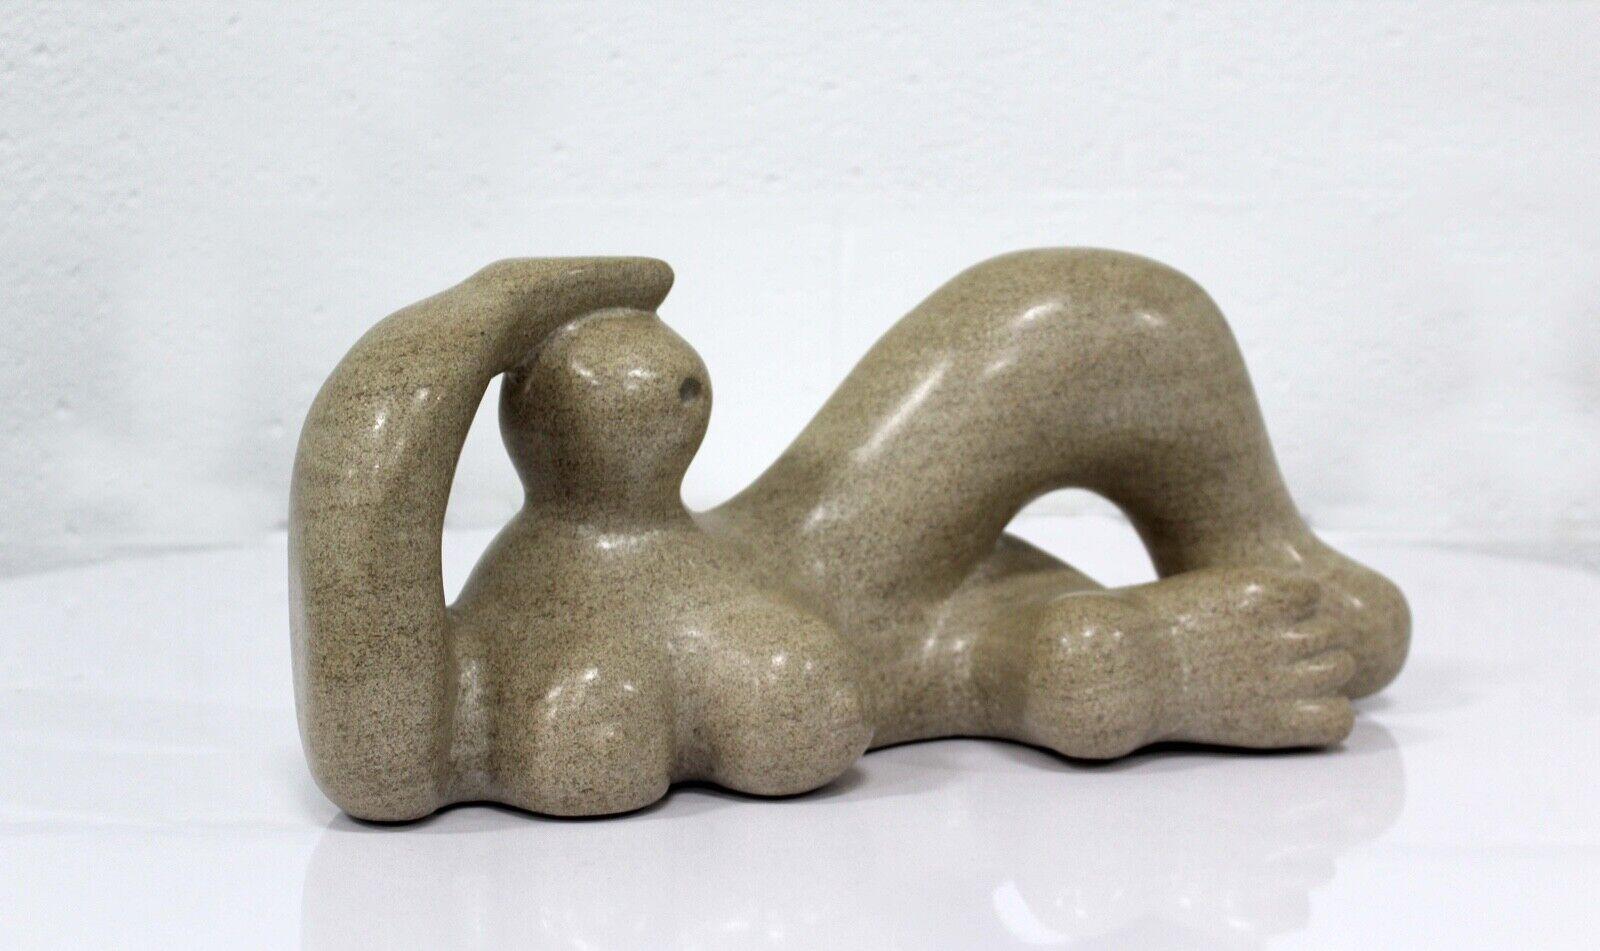 Le Shoppe Too in Michigan is offering a modernistic reclining figure stone sculpture. The curving semi-abstract figure is in the style of Henry Moore. Sculpture is unsigned. Dimensions: 16